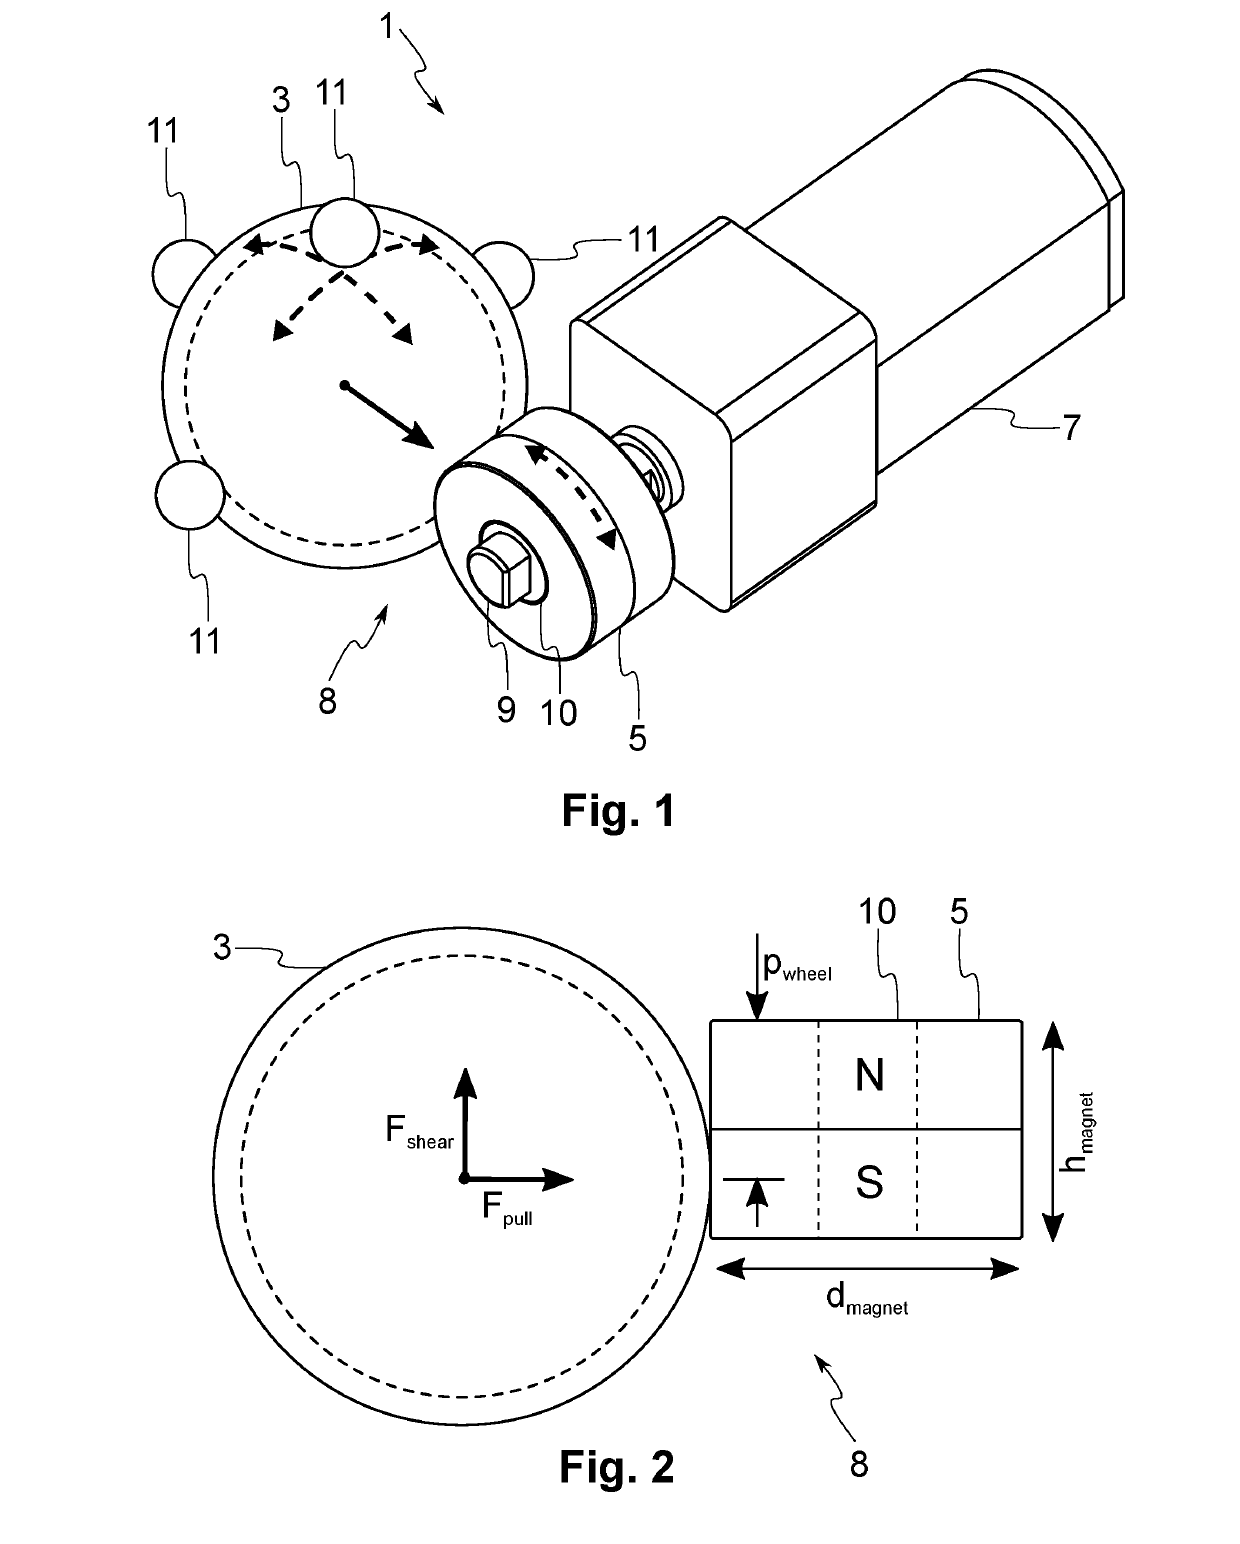 Magnet-assisted ball drive